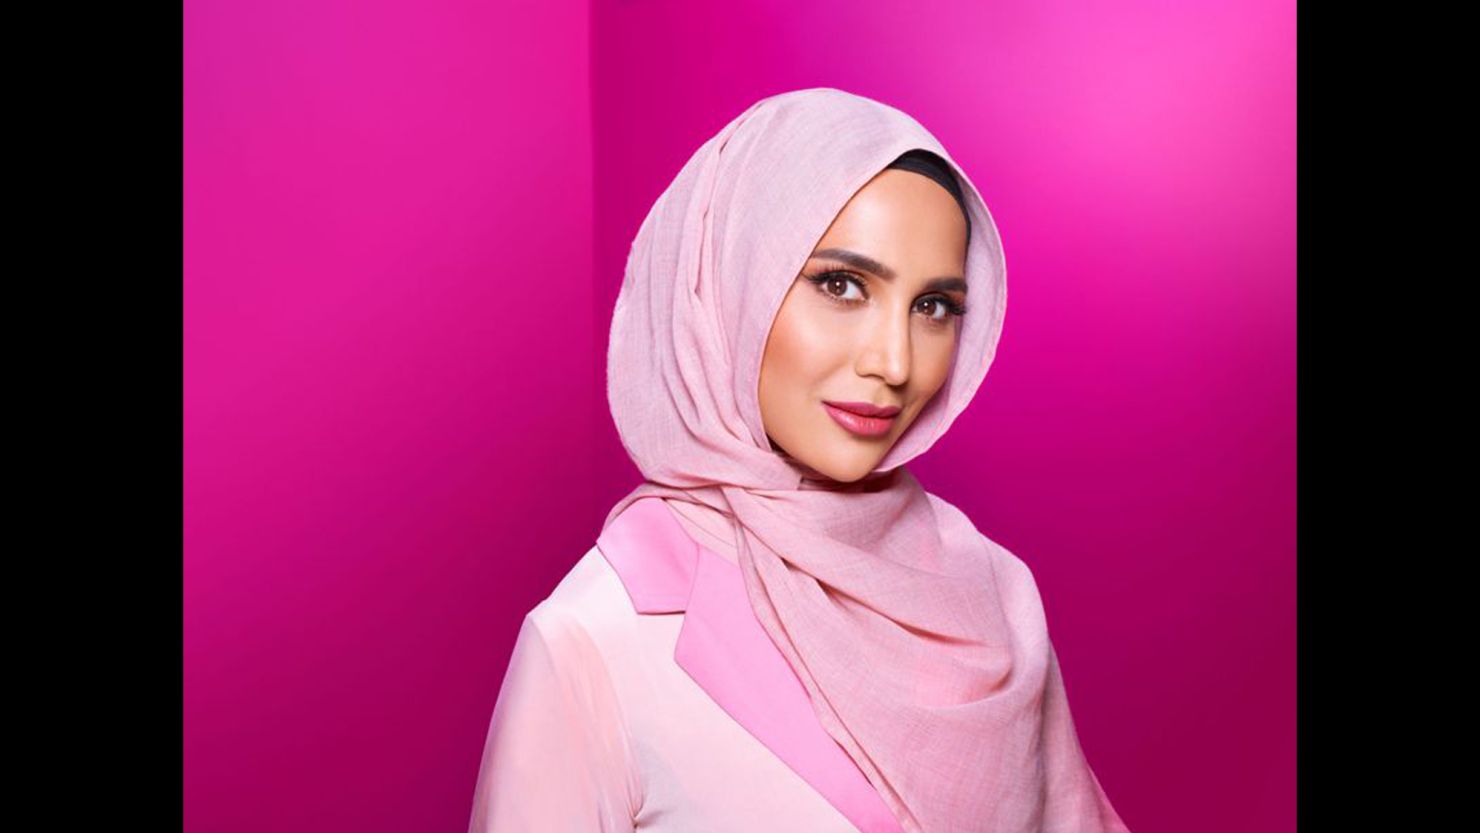 Amena Khan was featured in new L'Oreal Paris haircare ad campaign.